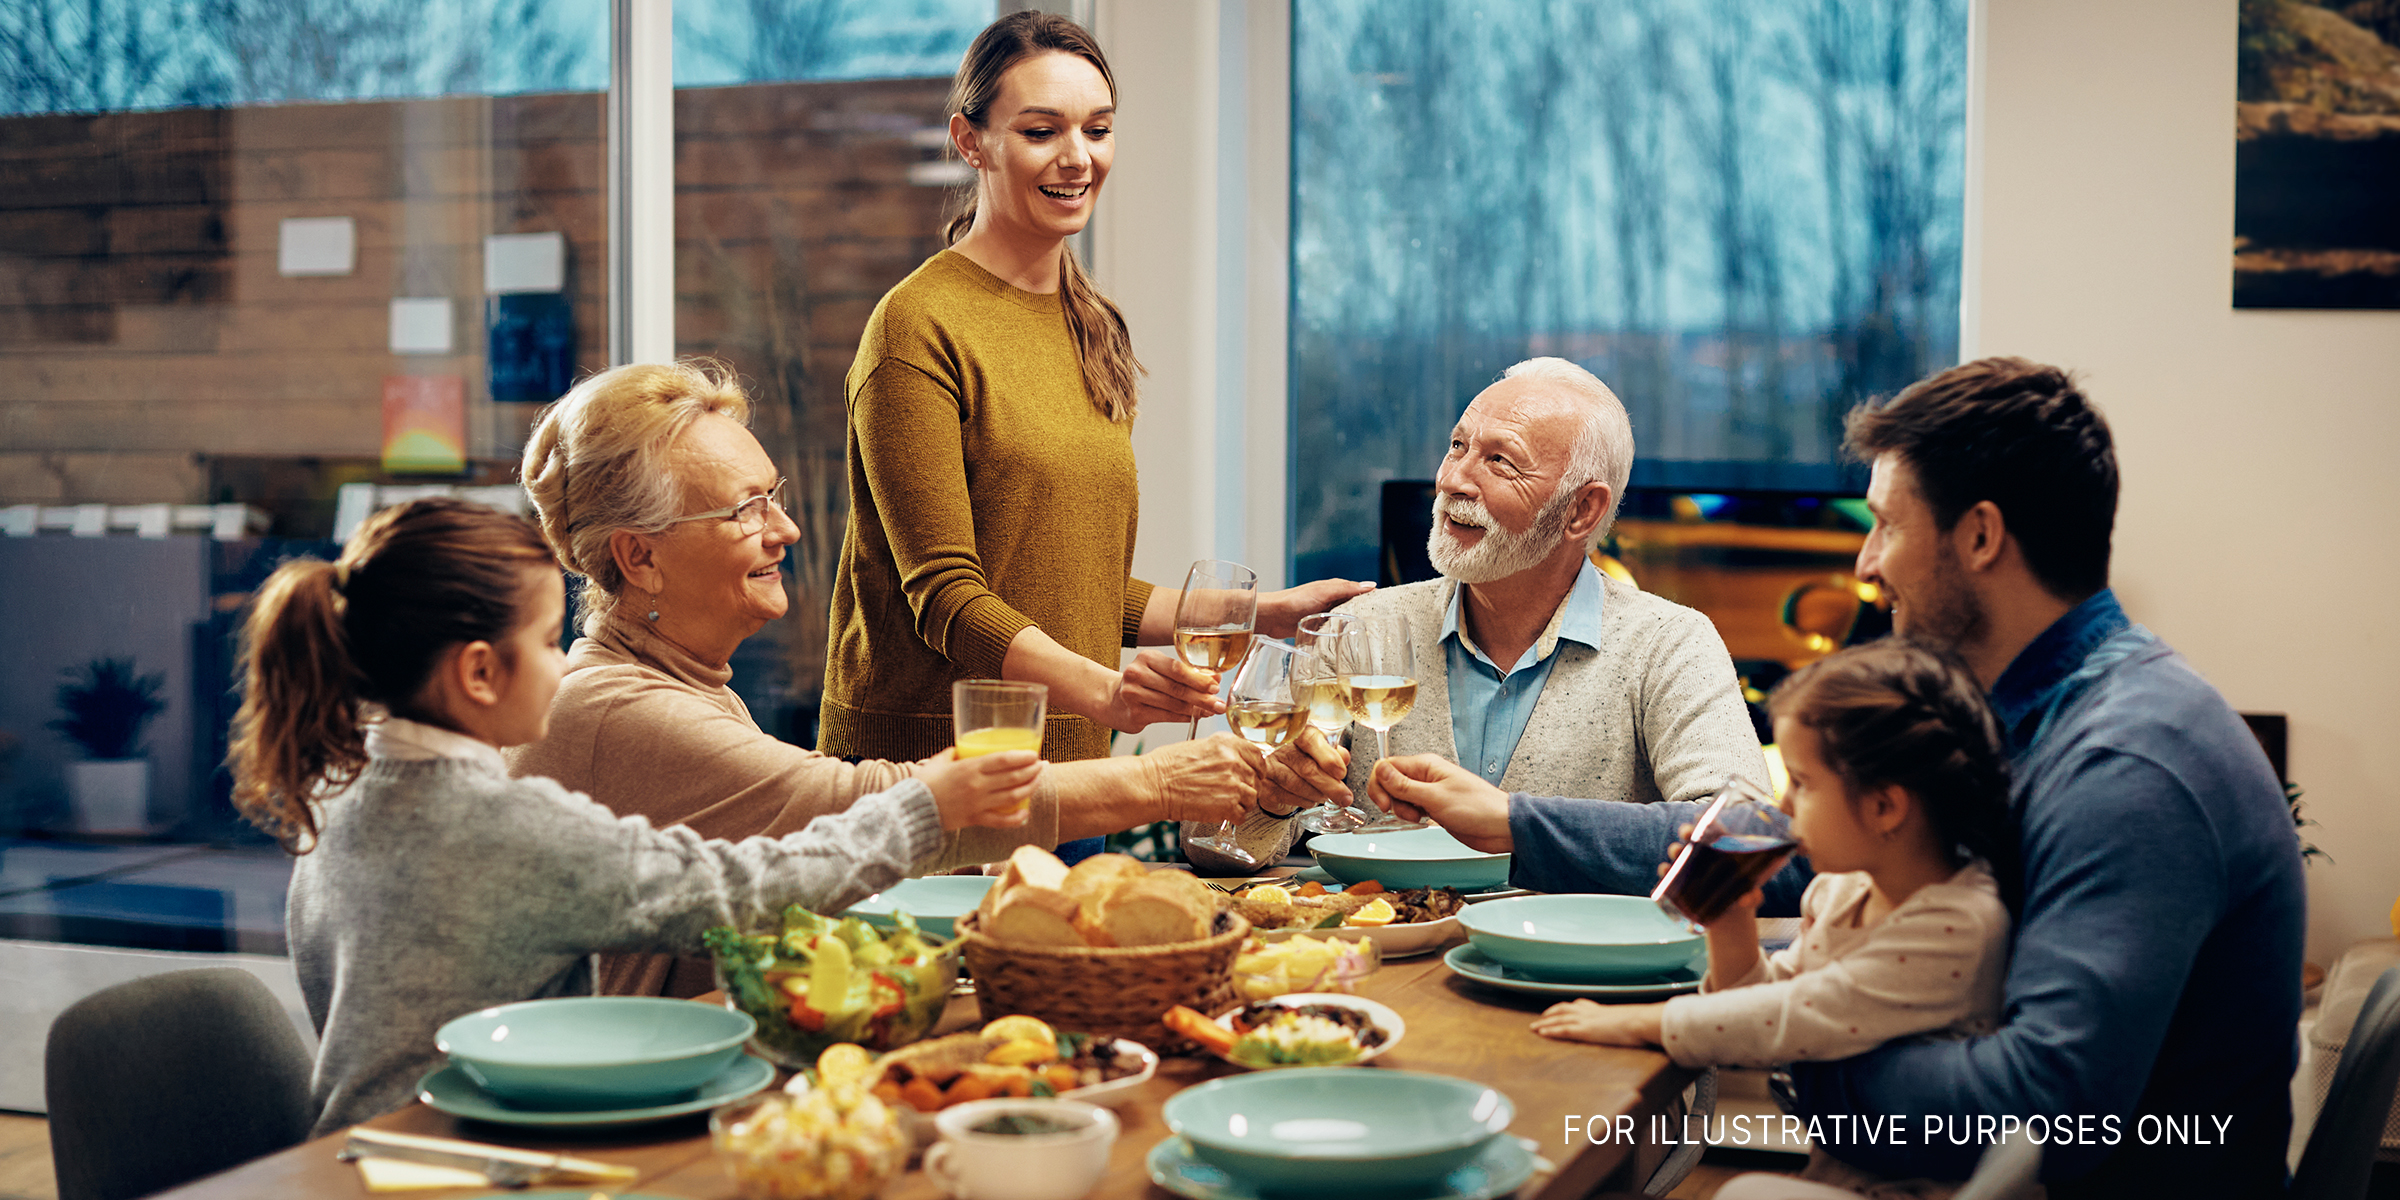 A happy extended family toasting while having lunch together in the dining room | Source: Shutterstock